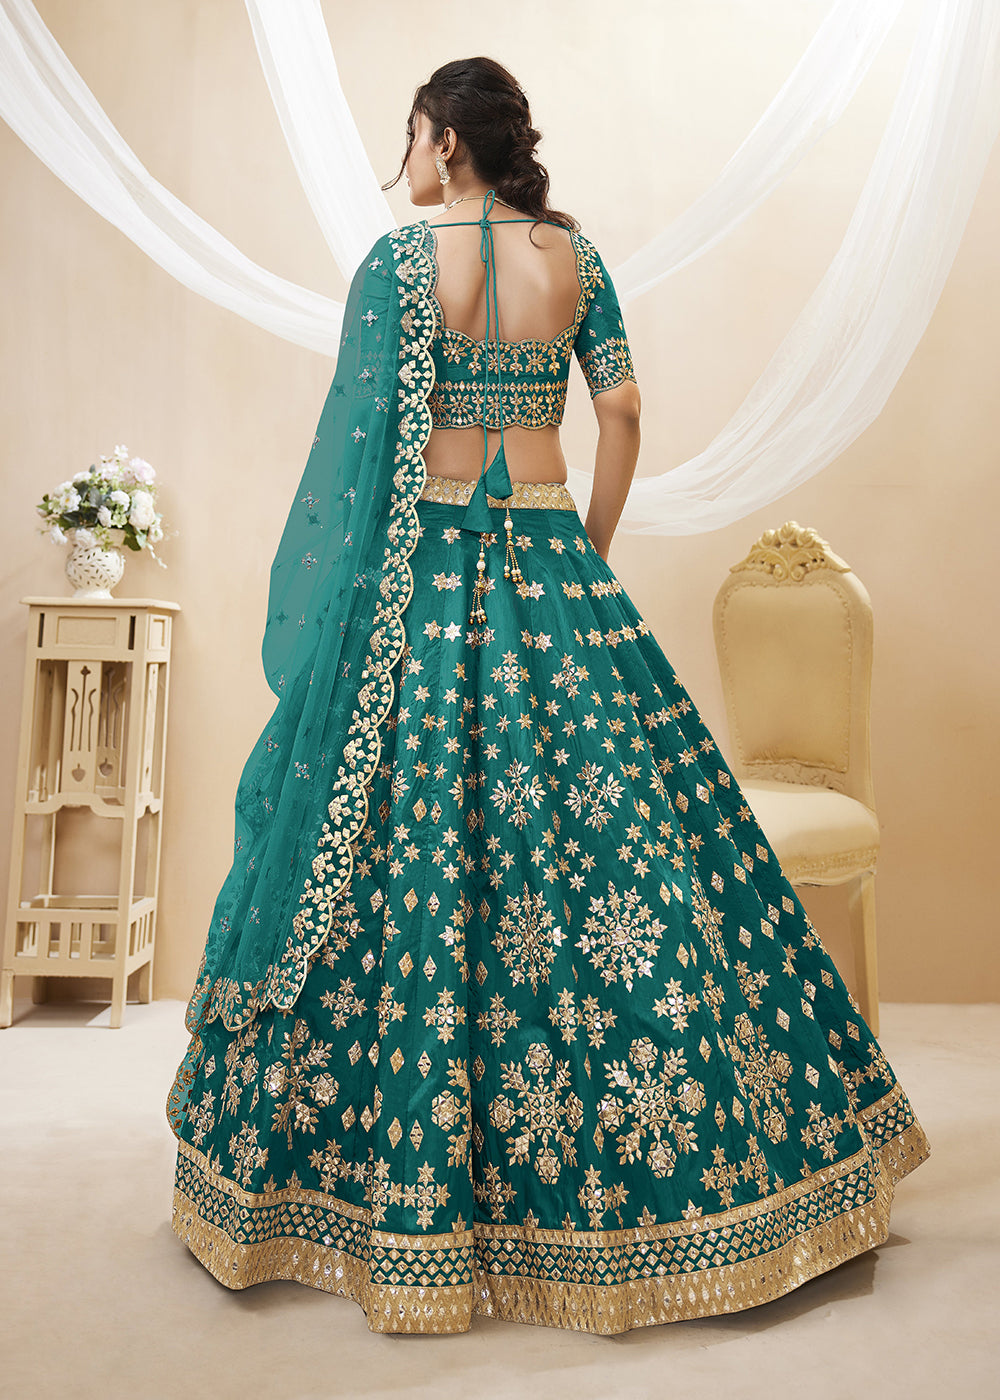 Buy Now Beatific Teal Green Art Silk Embroidered Reception Wear Lehenga Choli Online in USA, UK, Canada & Worldwide at Empress Clothing. 